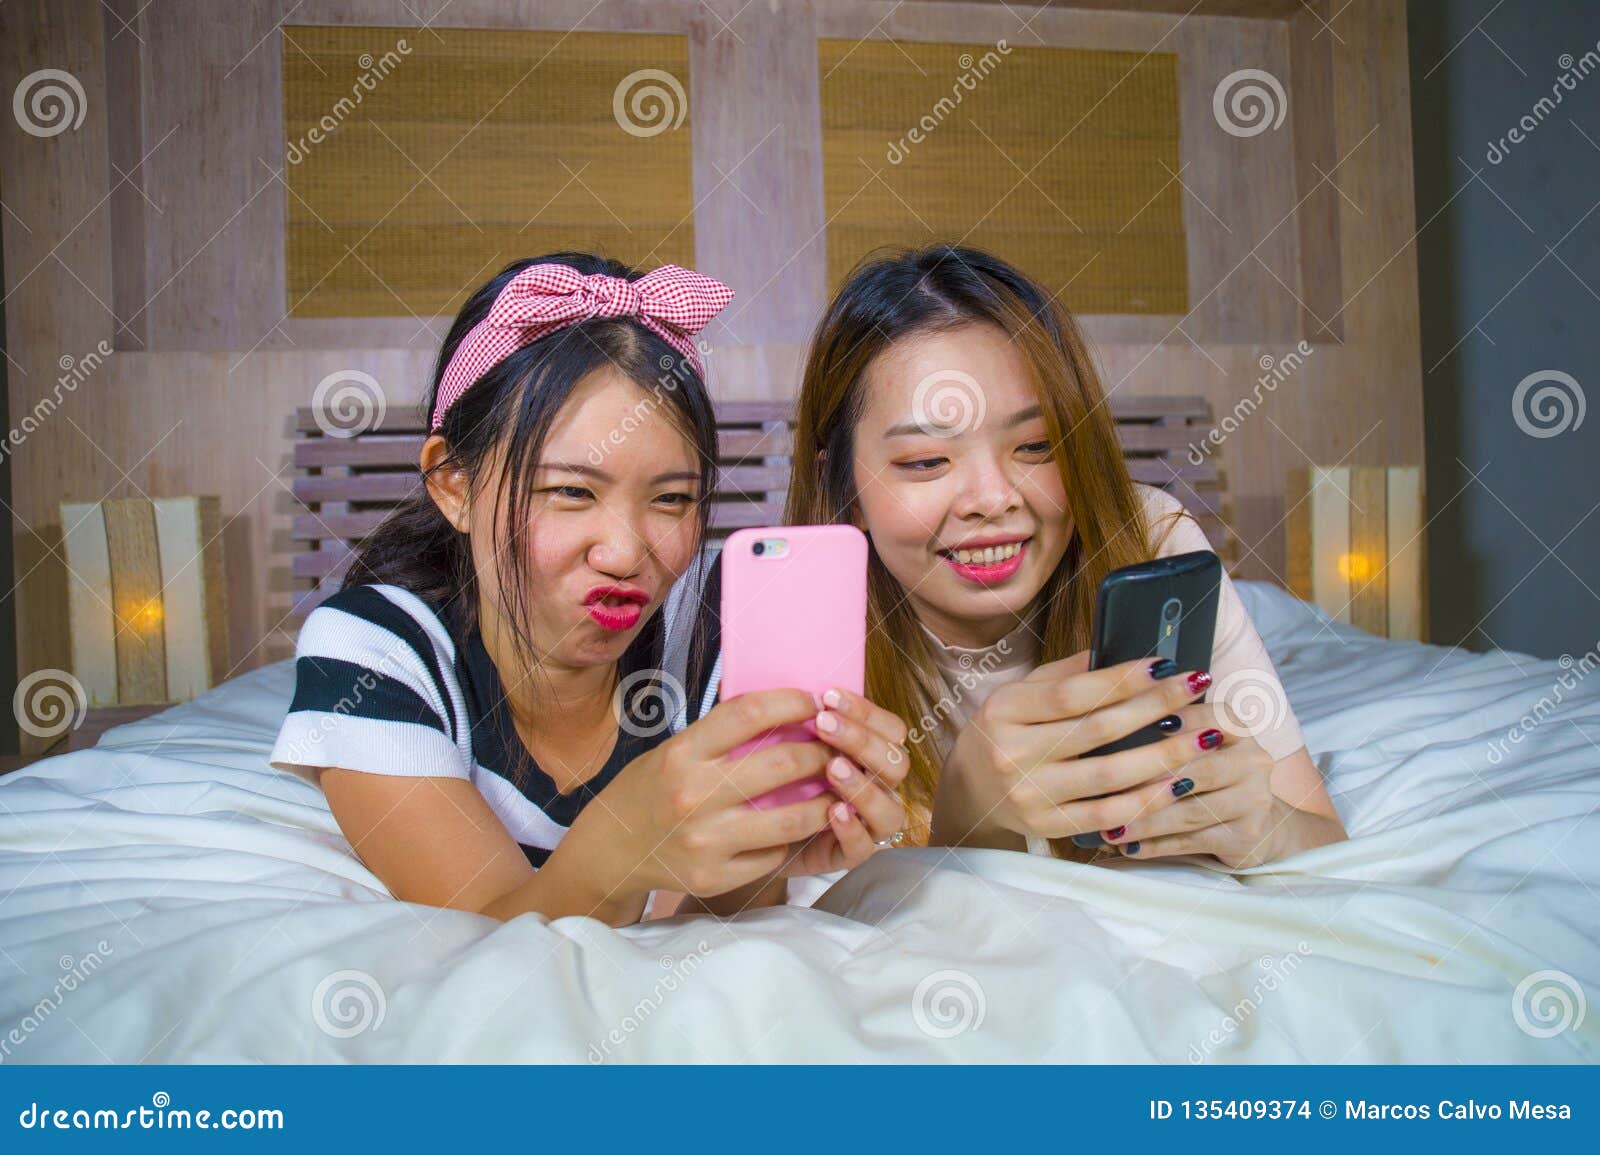 https://thumbs.dreamstime.com/z/young-happy-pretty-asian-chinese-girlfriends-sitting-home-bedroom-laughing-talking-having-fun-using-internet-social-two-135409374.jpg